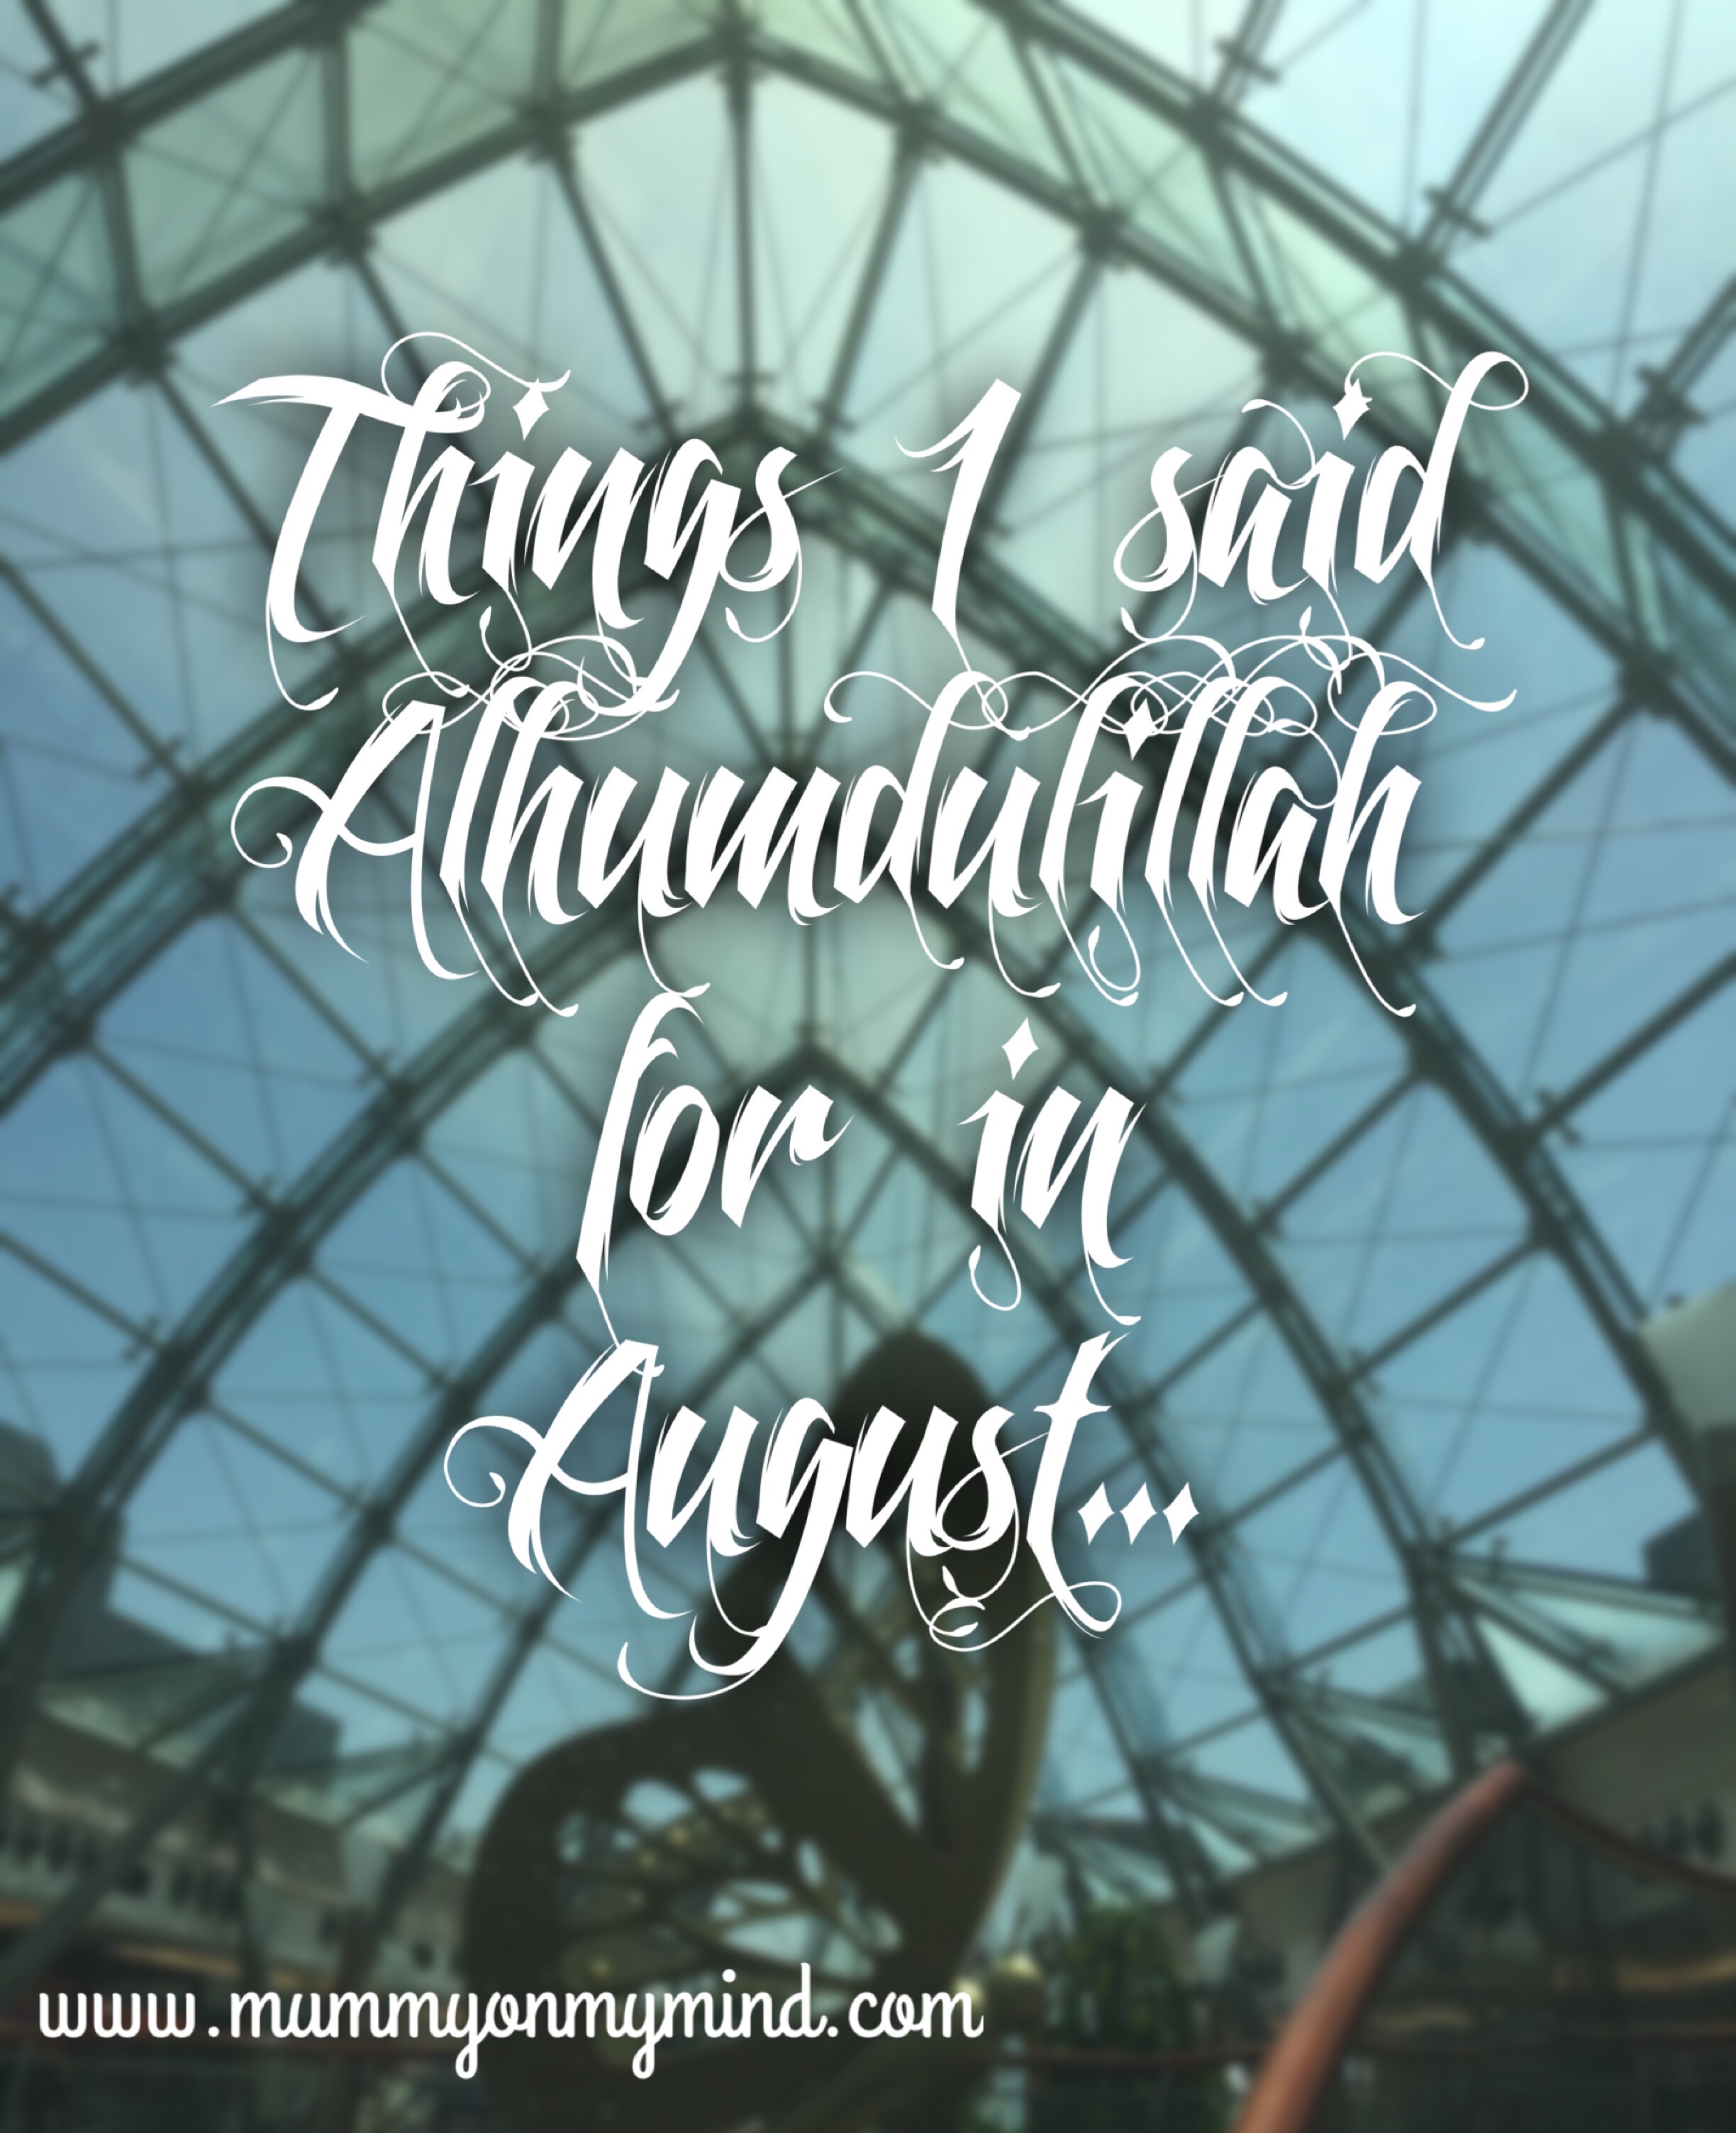 Things I said Alhumdulillah for in August 2016…